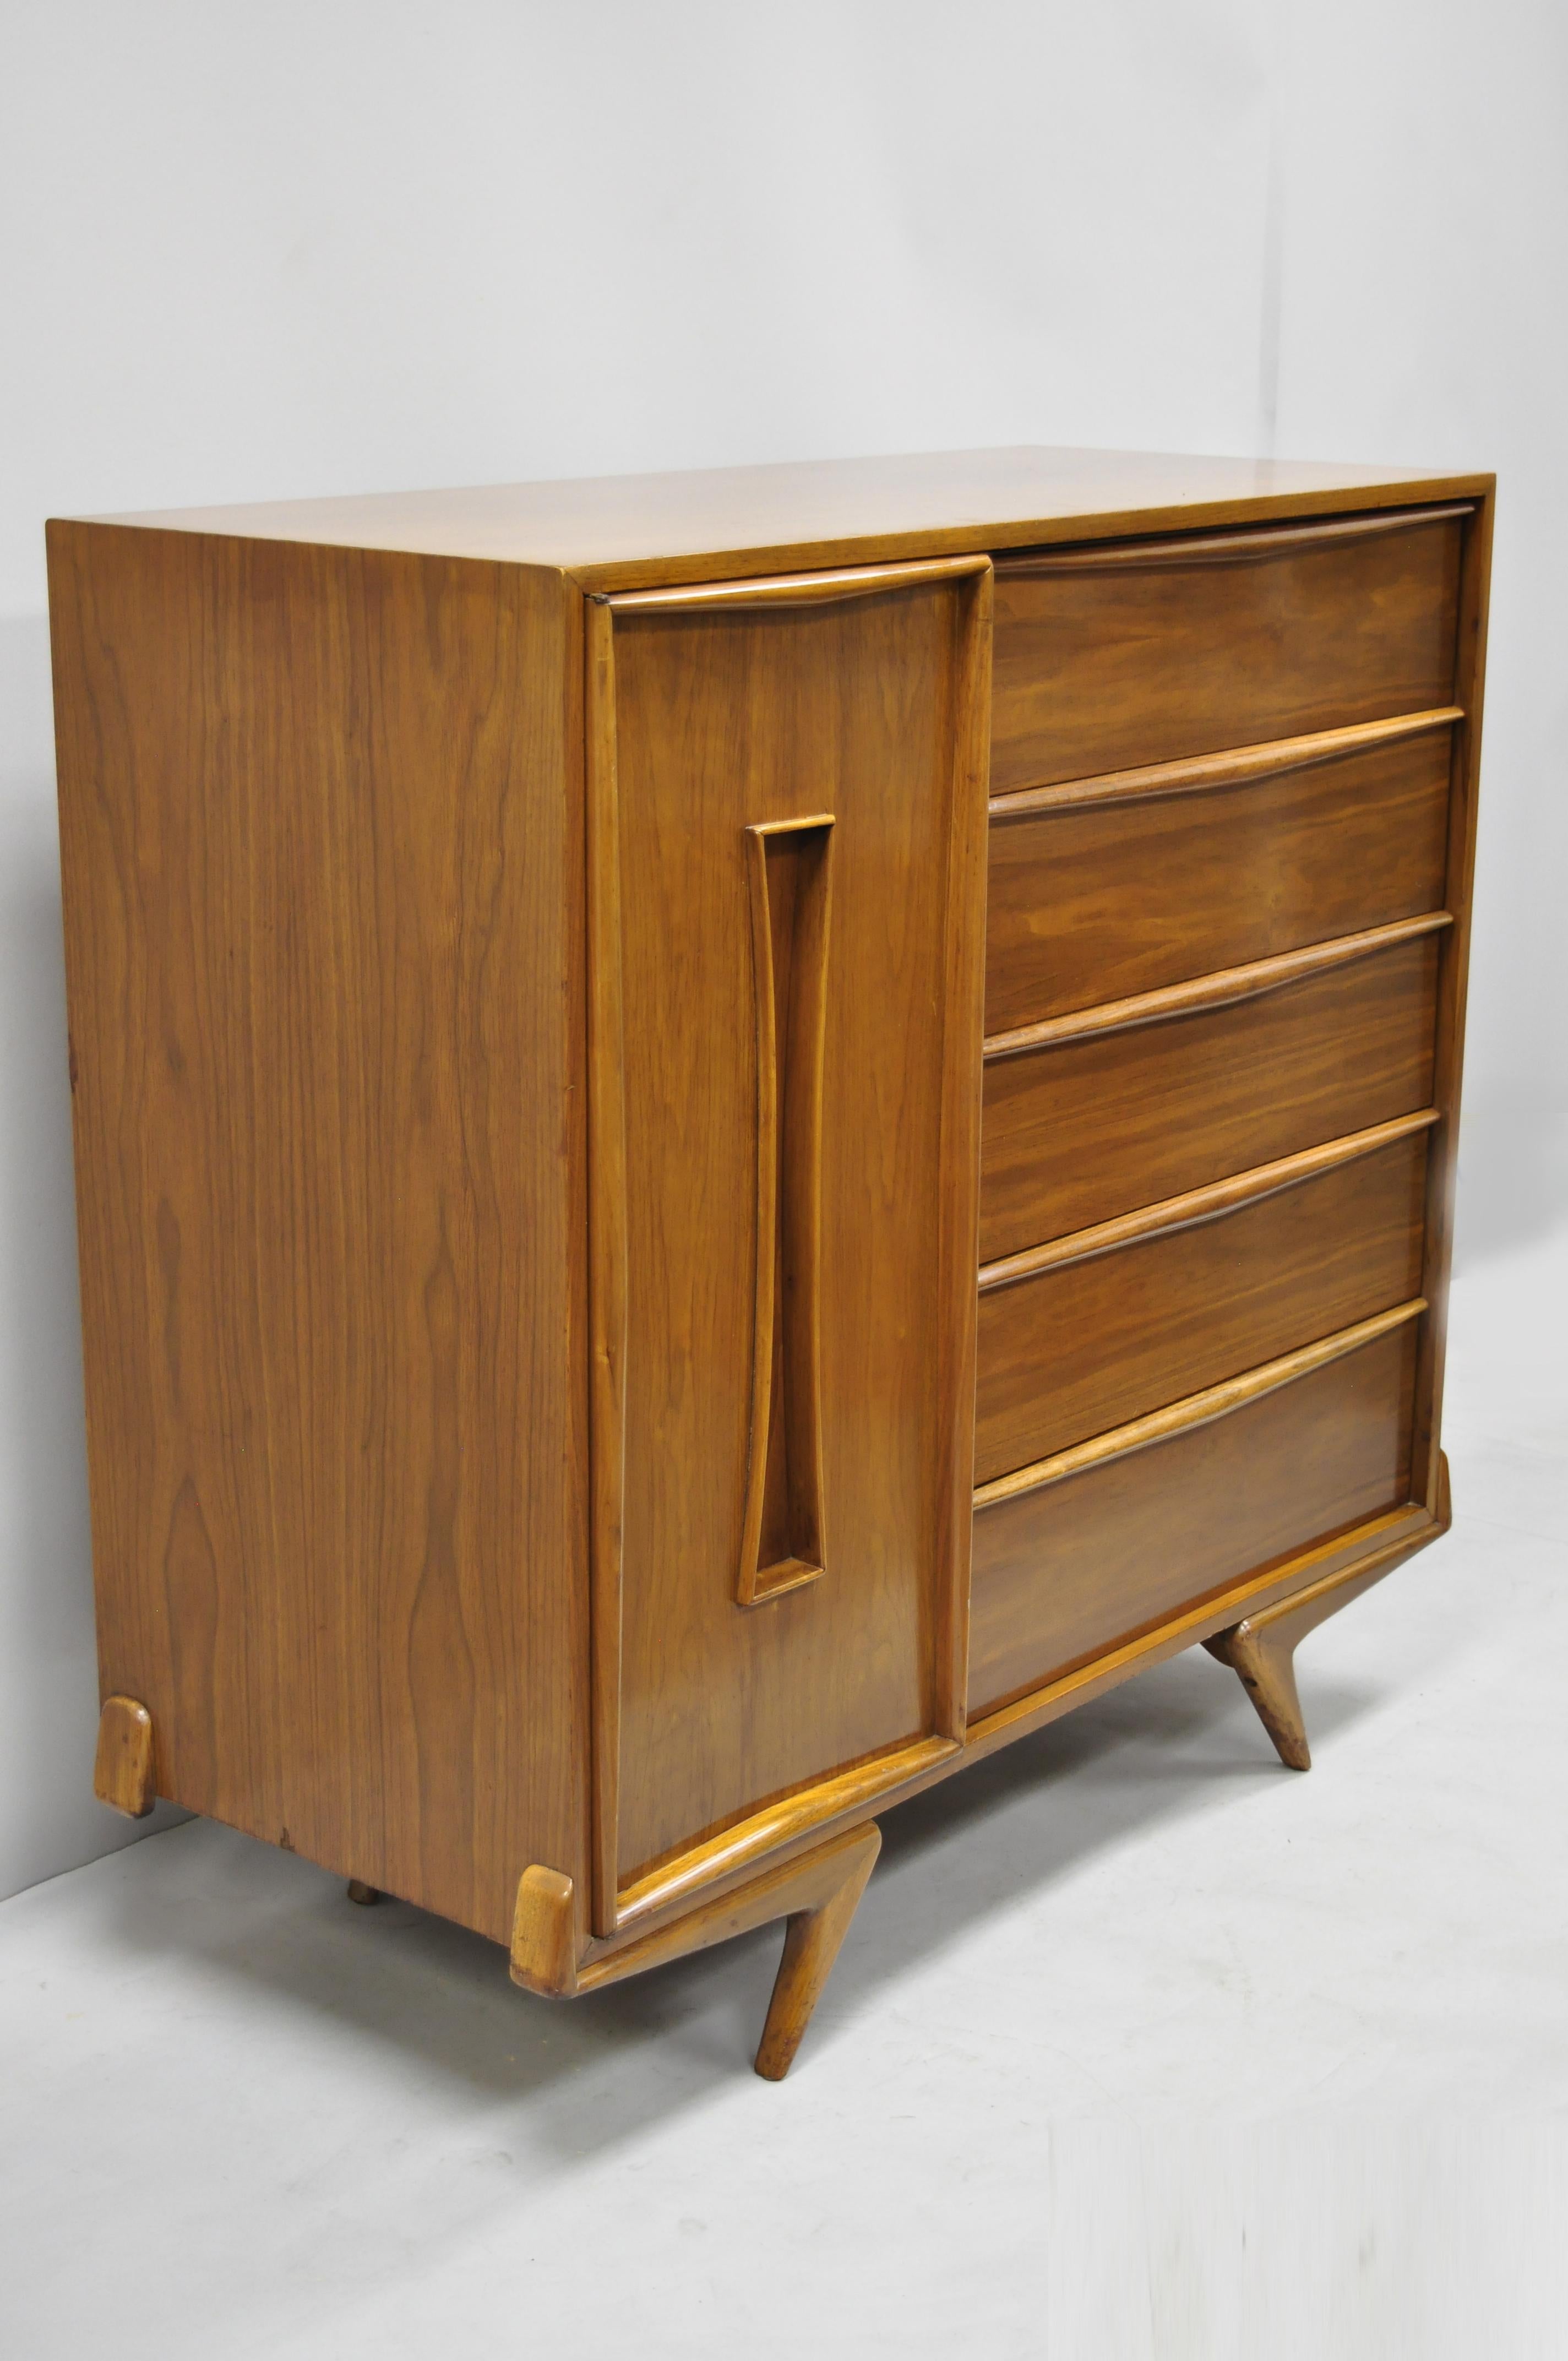 Vintage Mid-Century Modern sculptural walnut gentlemen’s tall chest dresser with sculptural boomerang legs. Item features angled and tapered 